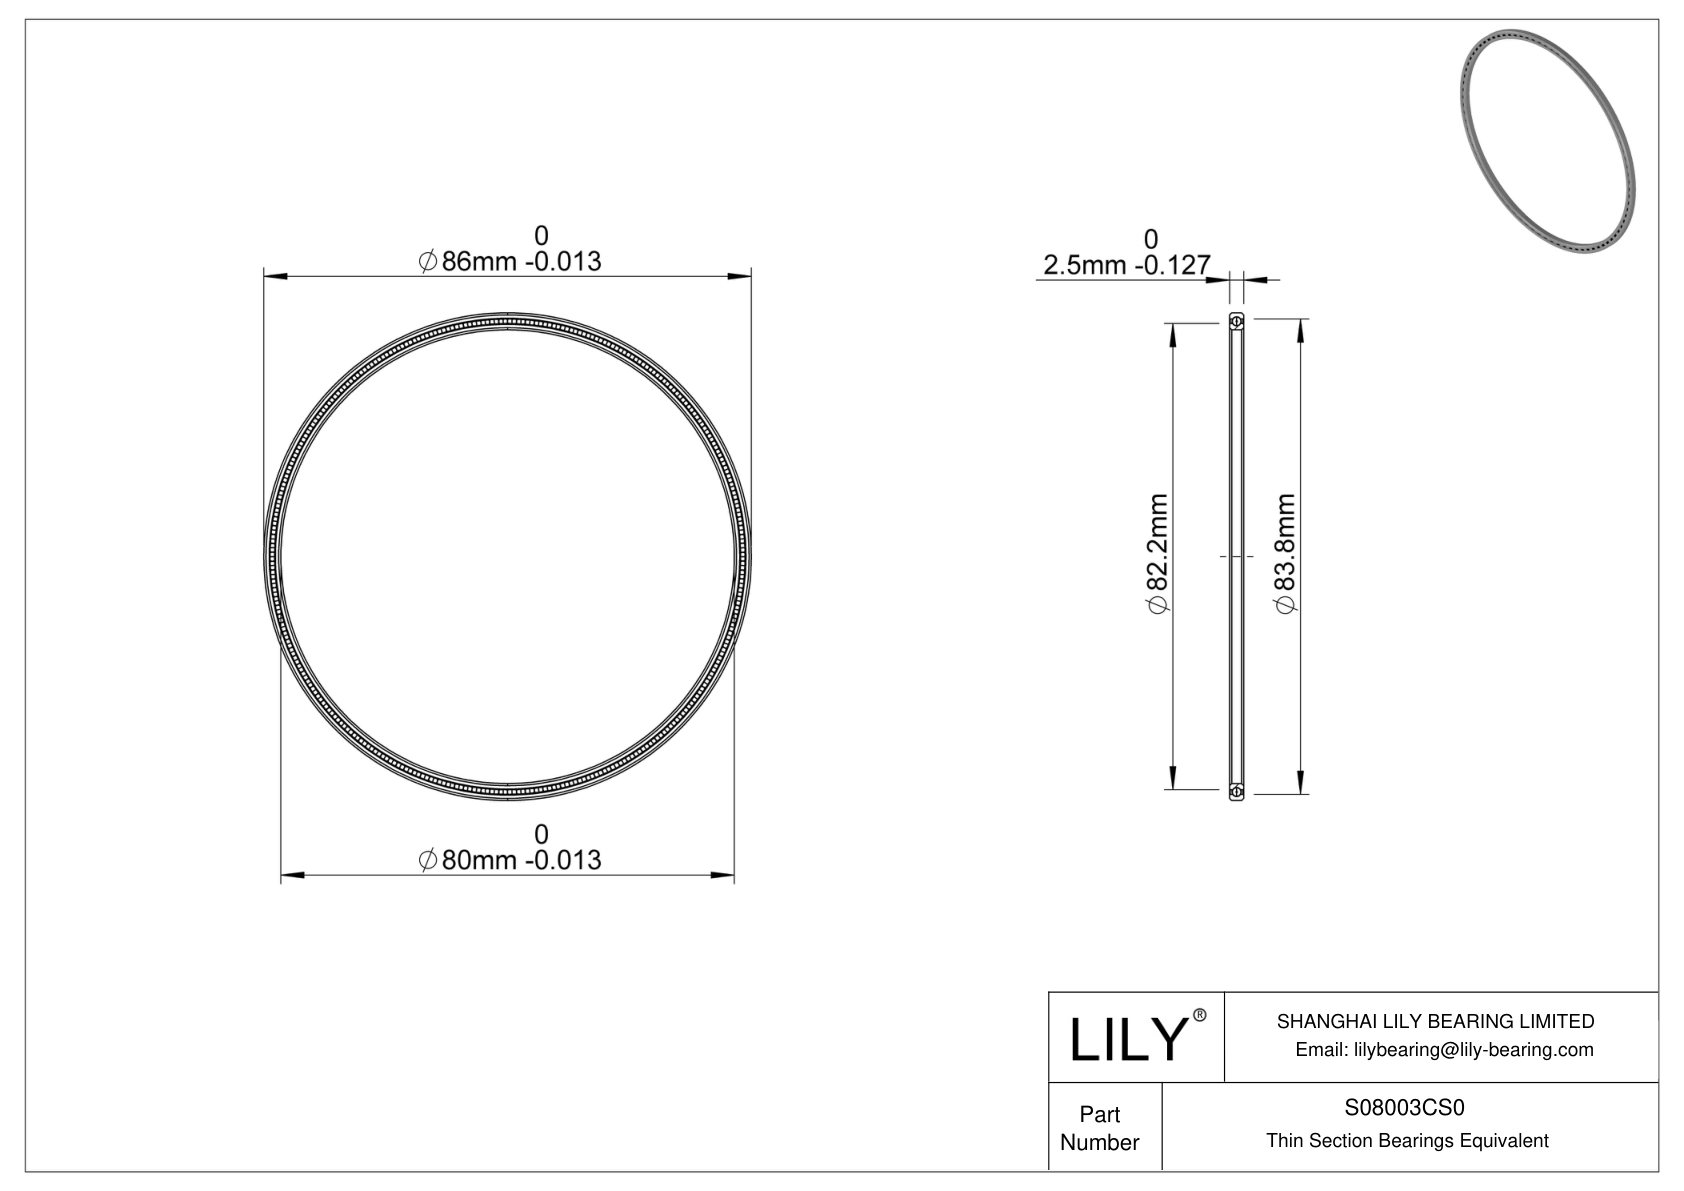 S08003CS0 Constant Section (CS) Bearings cad drawing